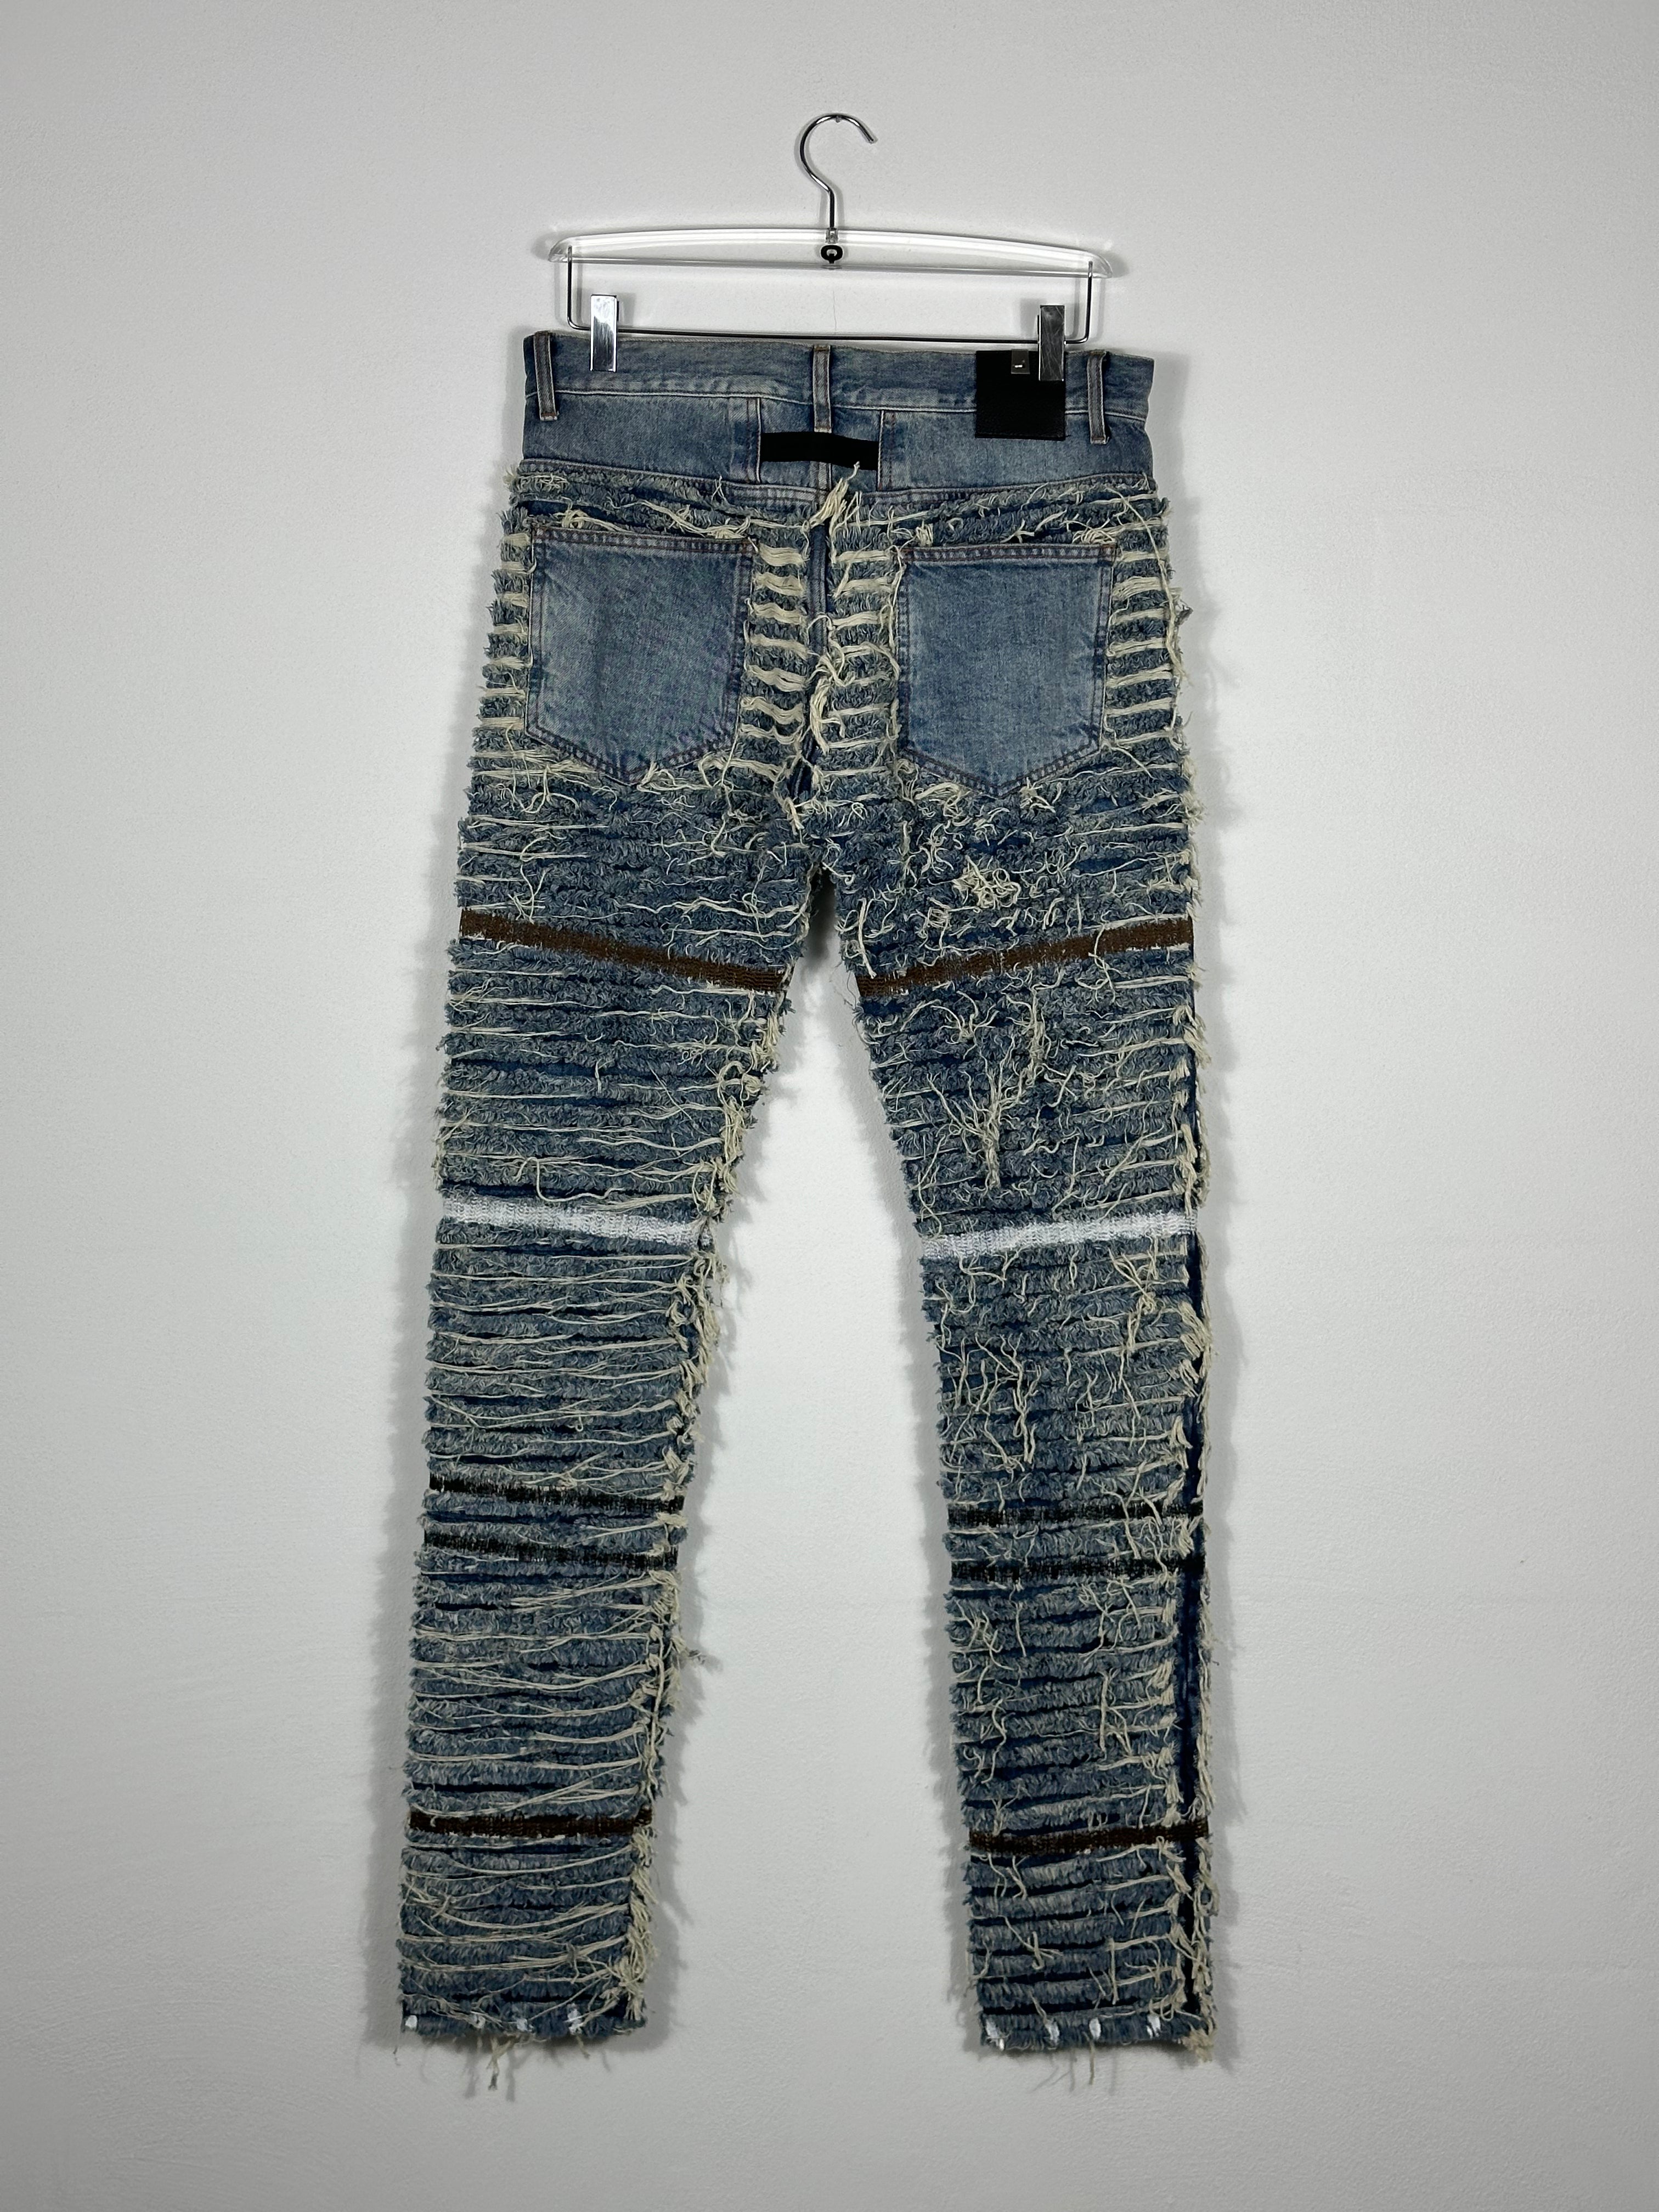 All-over Frayed Jeans by Sfera Ebbasta